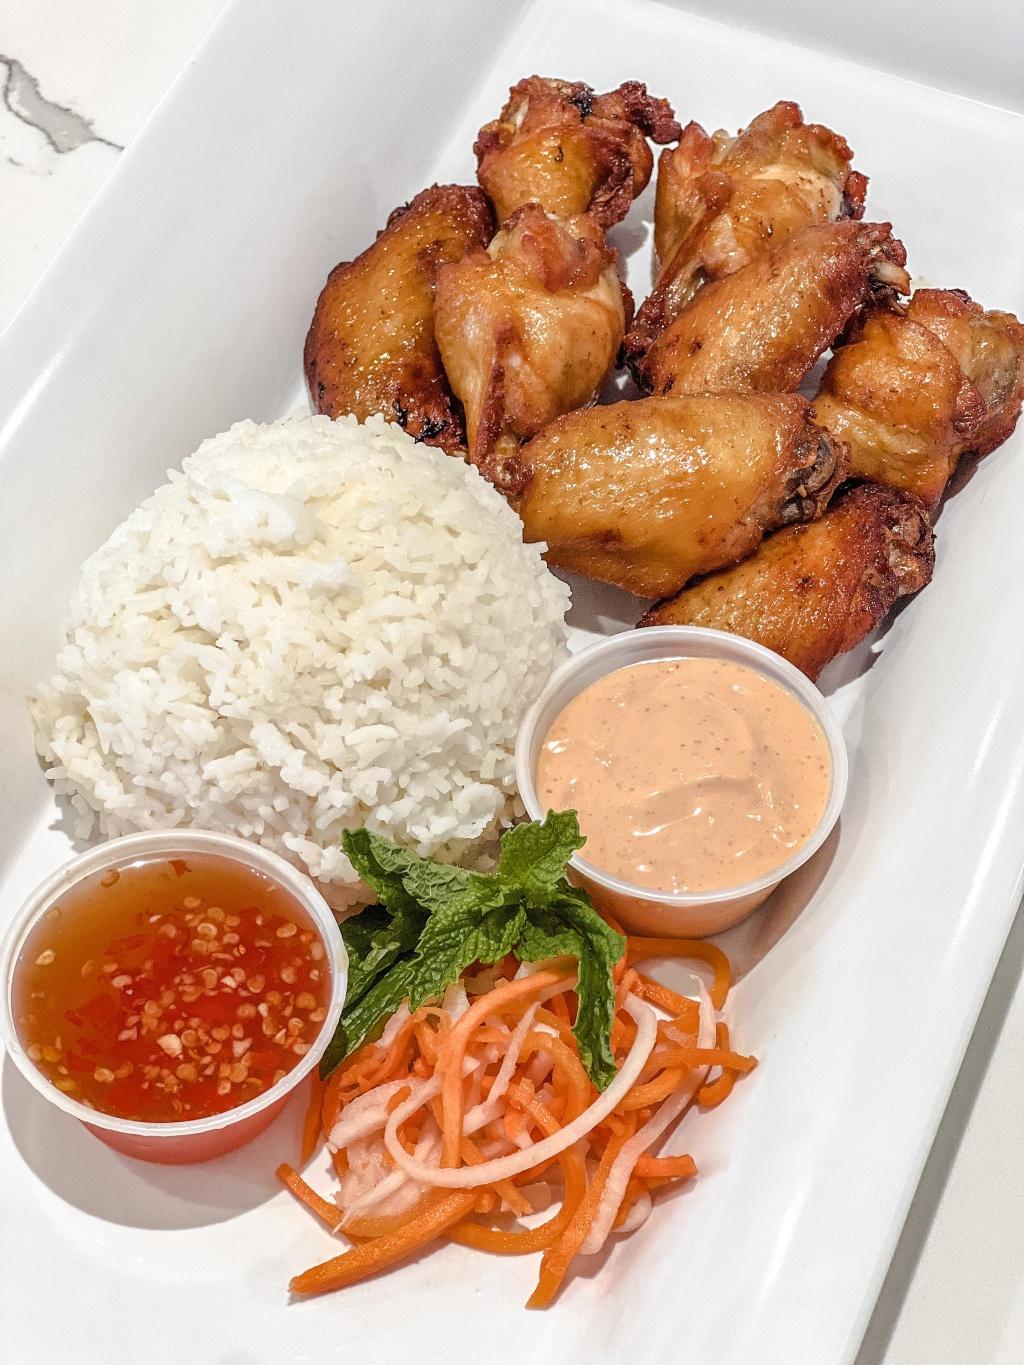 Image for Vietnamese Fried Chicken.